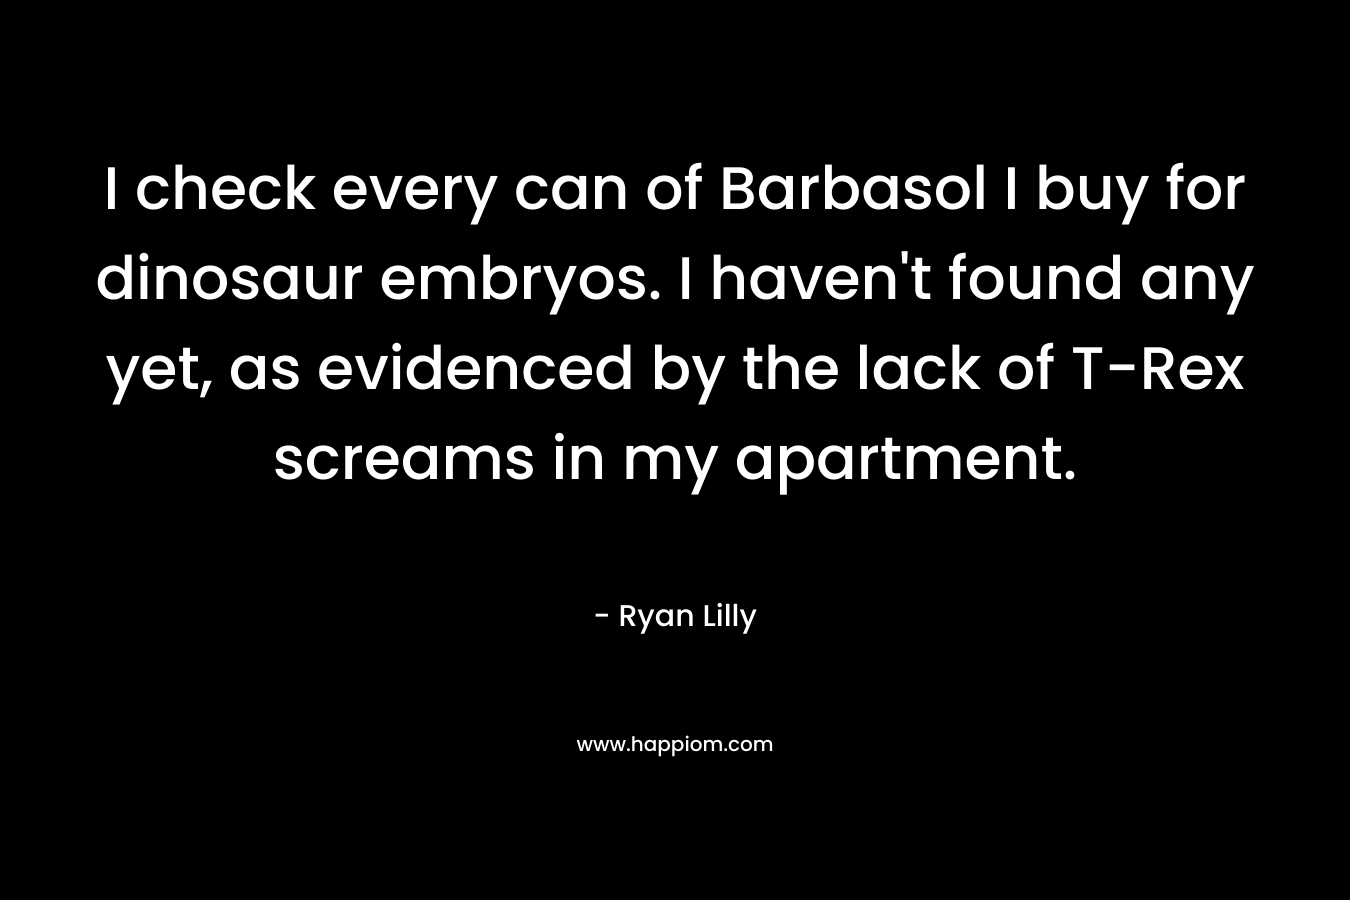 I check every can of Barbasol I buy for dinosaur embryos. I haven’t found any yet, as evidenced by the lack of T-Rex screams in my apartment. – Ryan Lilly